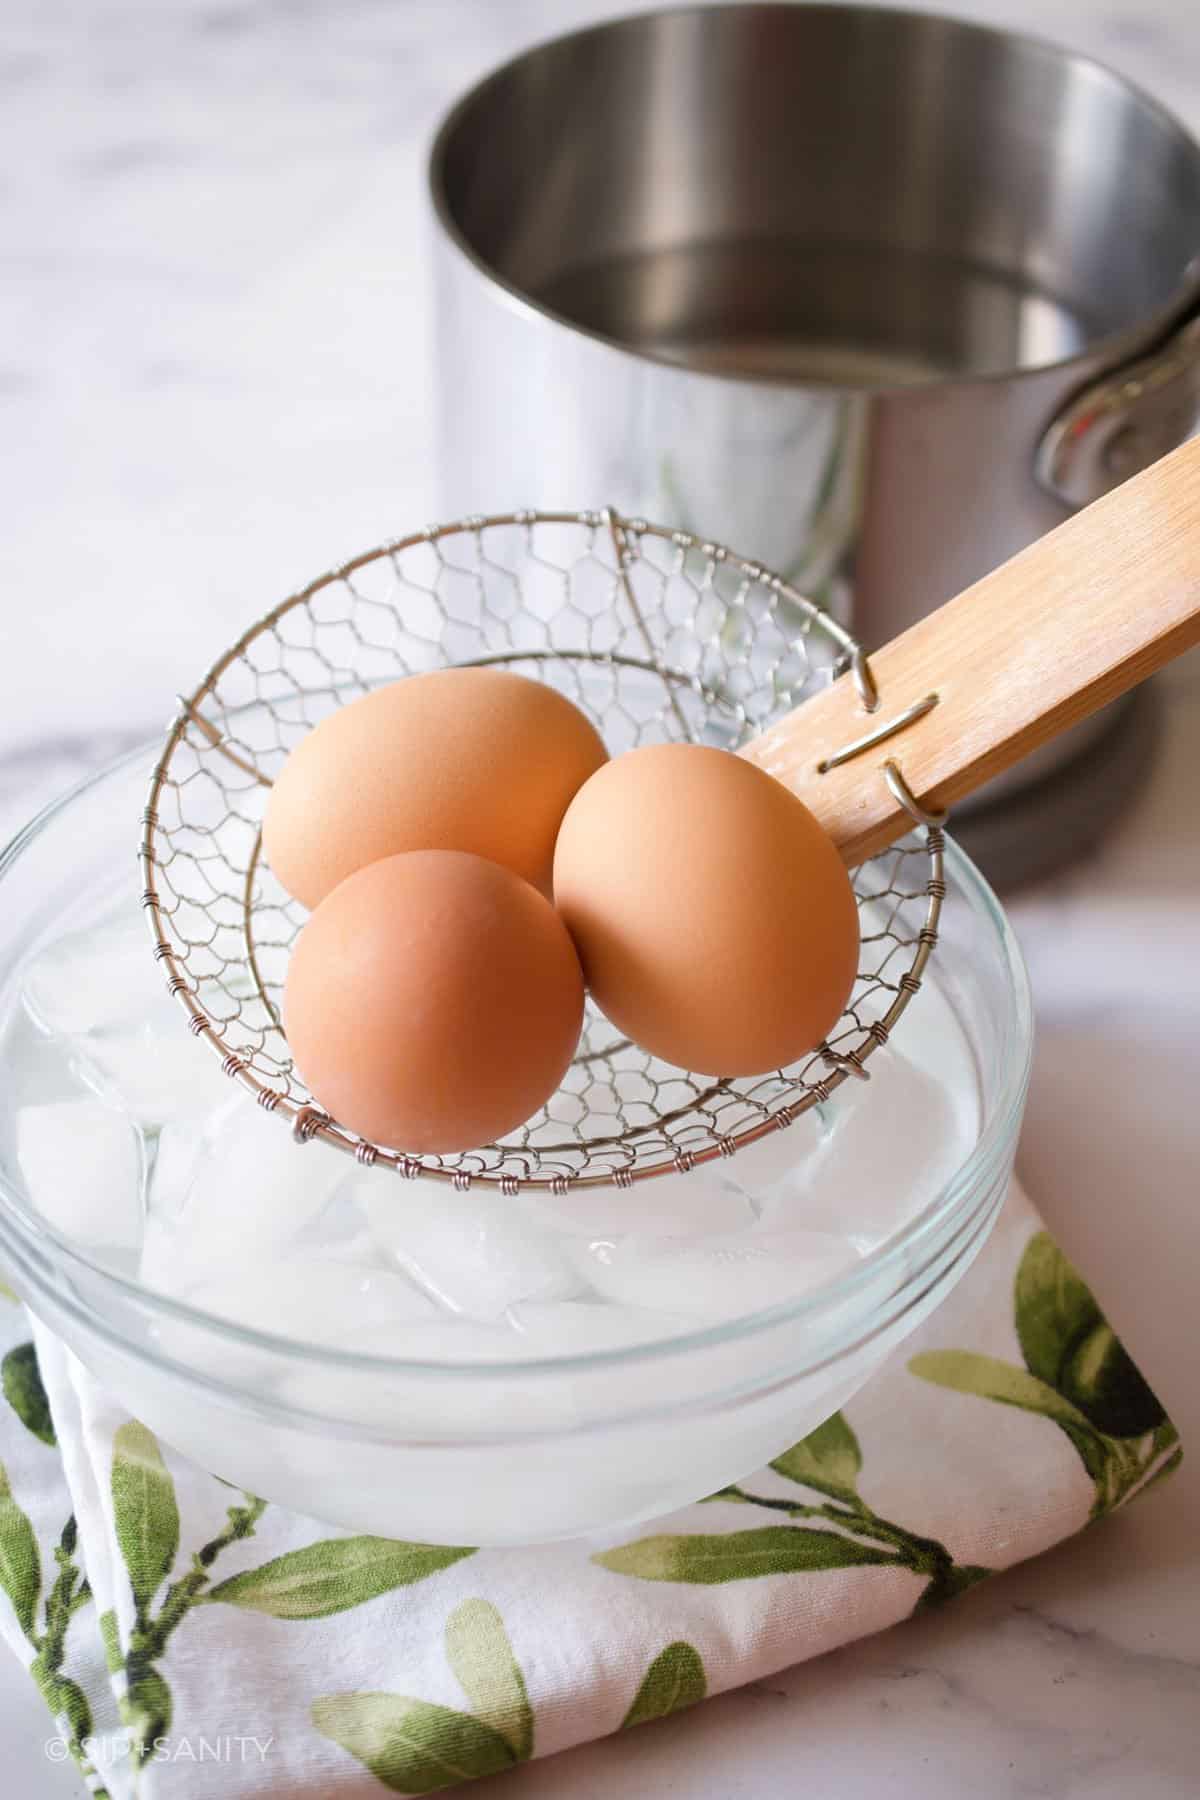 boiled eggs going into a bowl of ice water